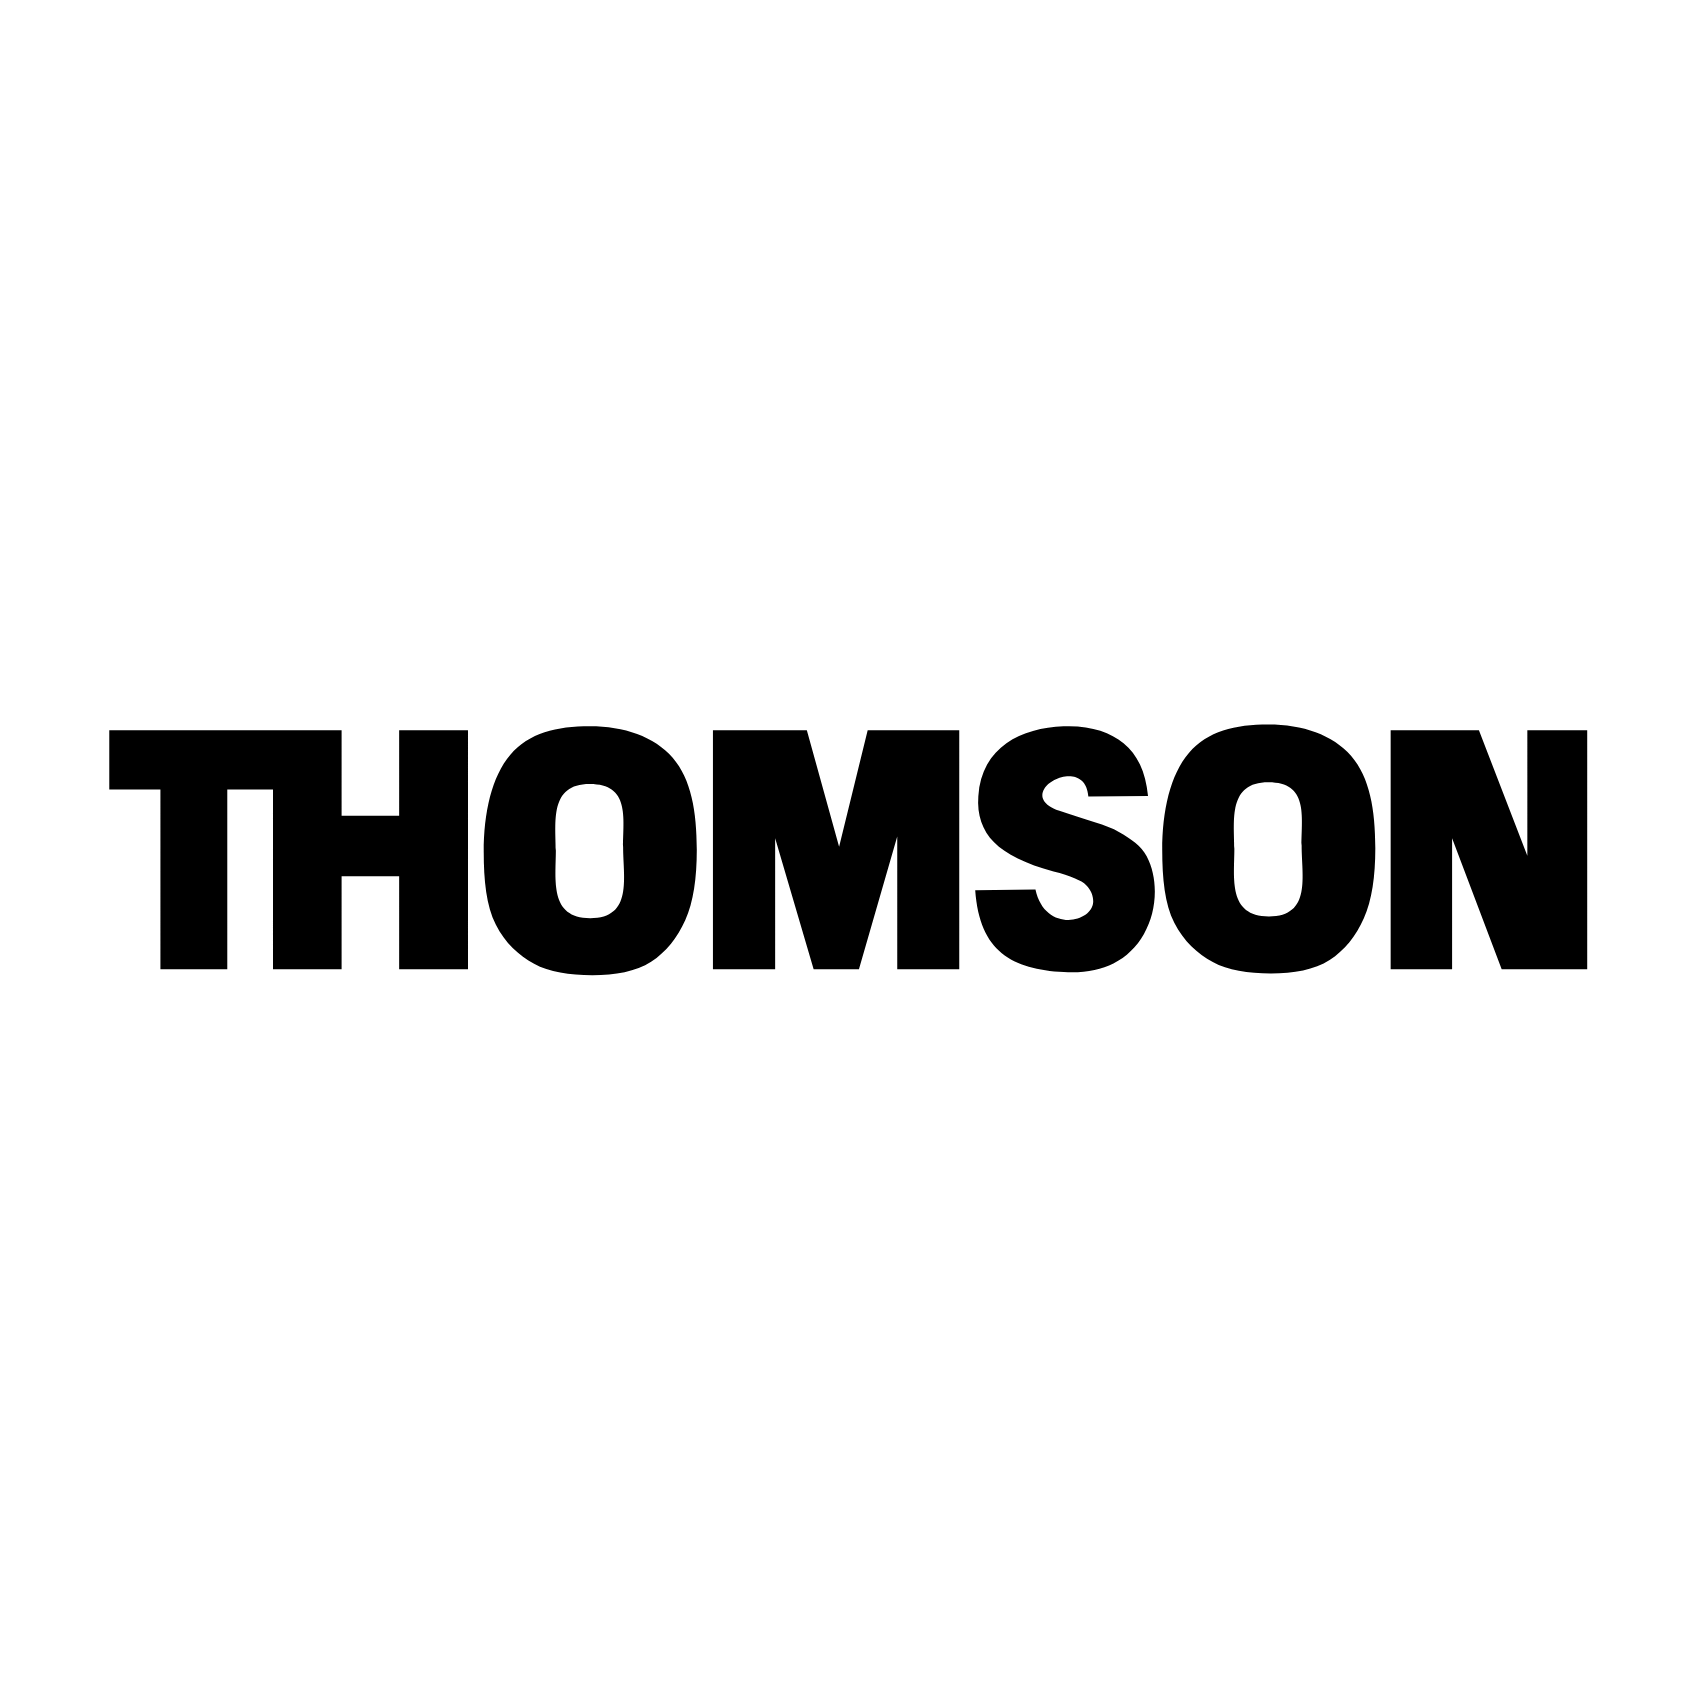 Download Thomson Logo PNG and Vector (PDF, SVG, Ai, EPS) Free